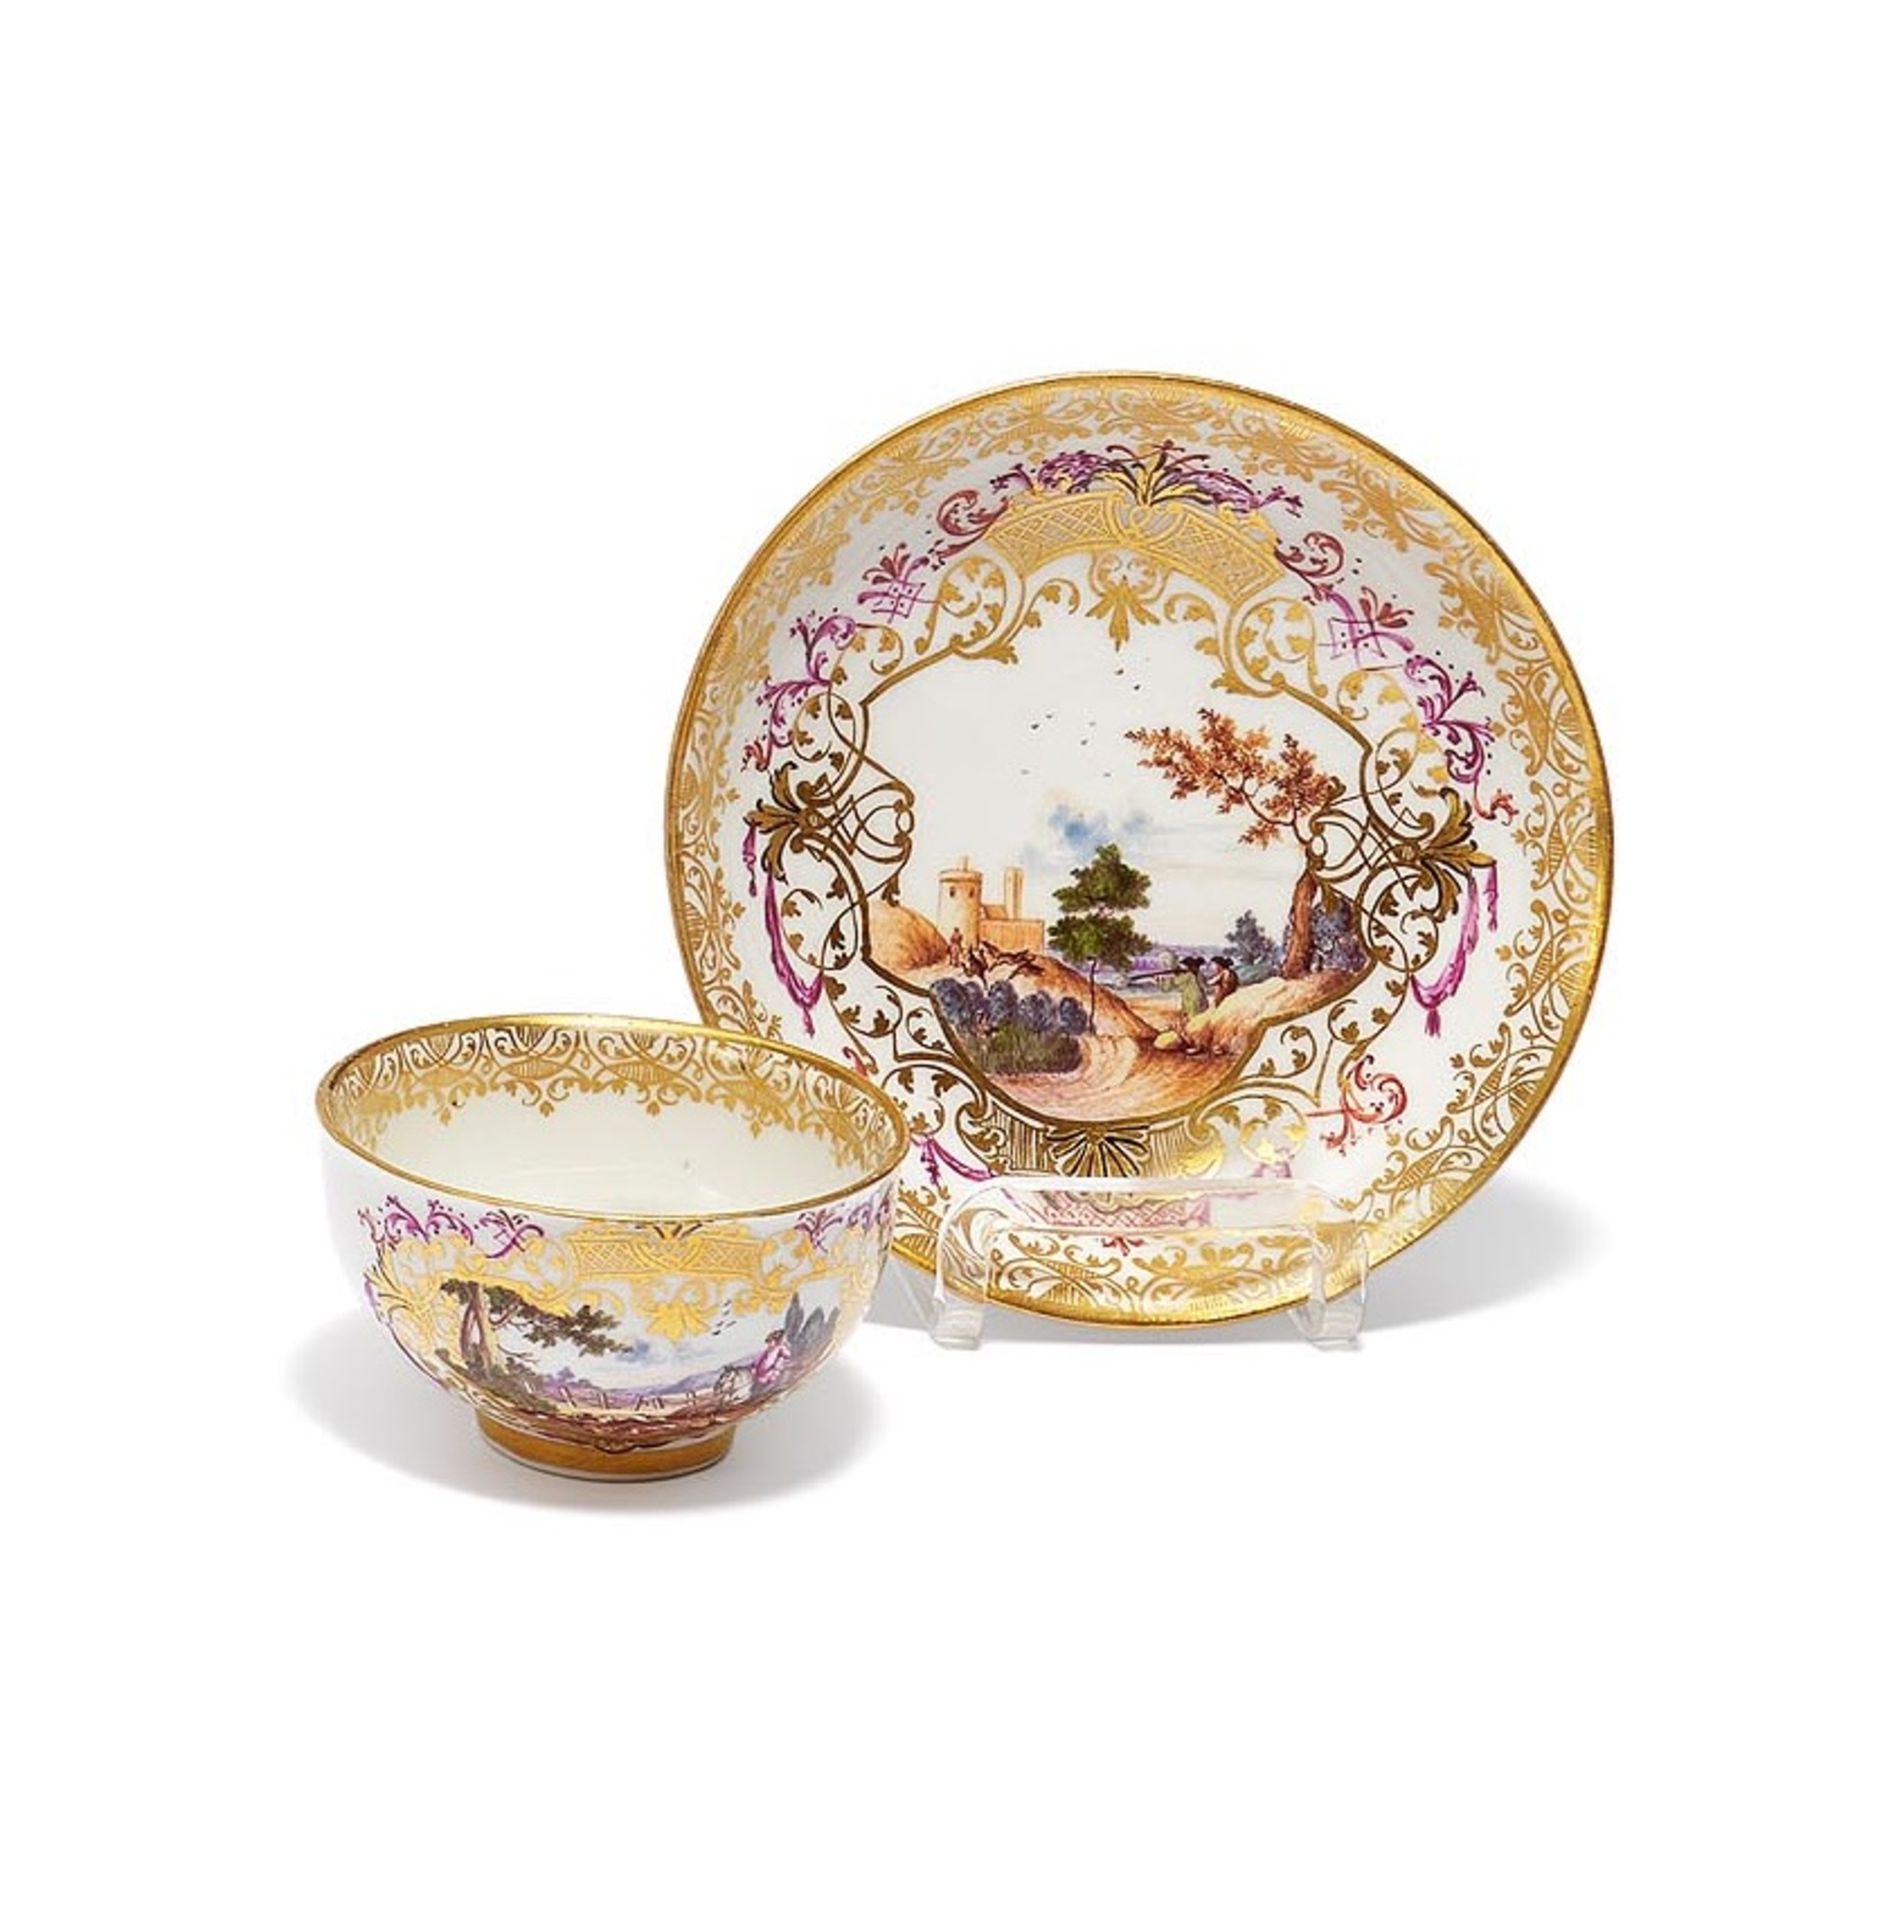 Meissen: CUP AND SAUCER WITH LARGE GOLD CARTOUCHES AND HUNTING SCENES